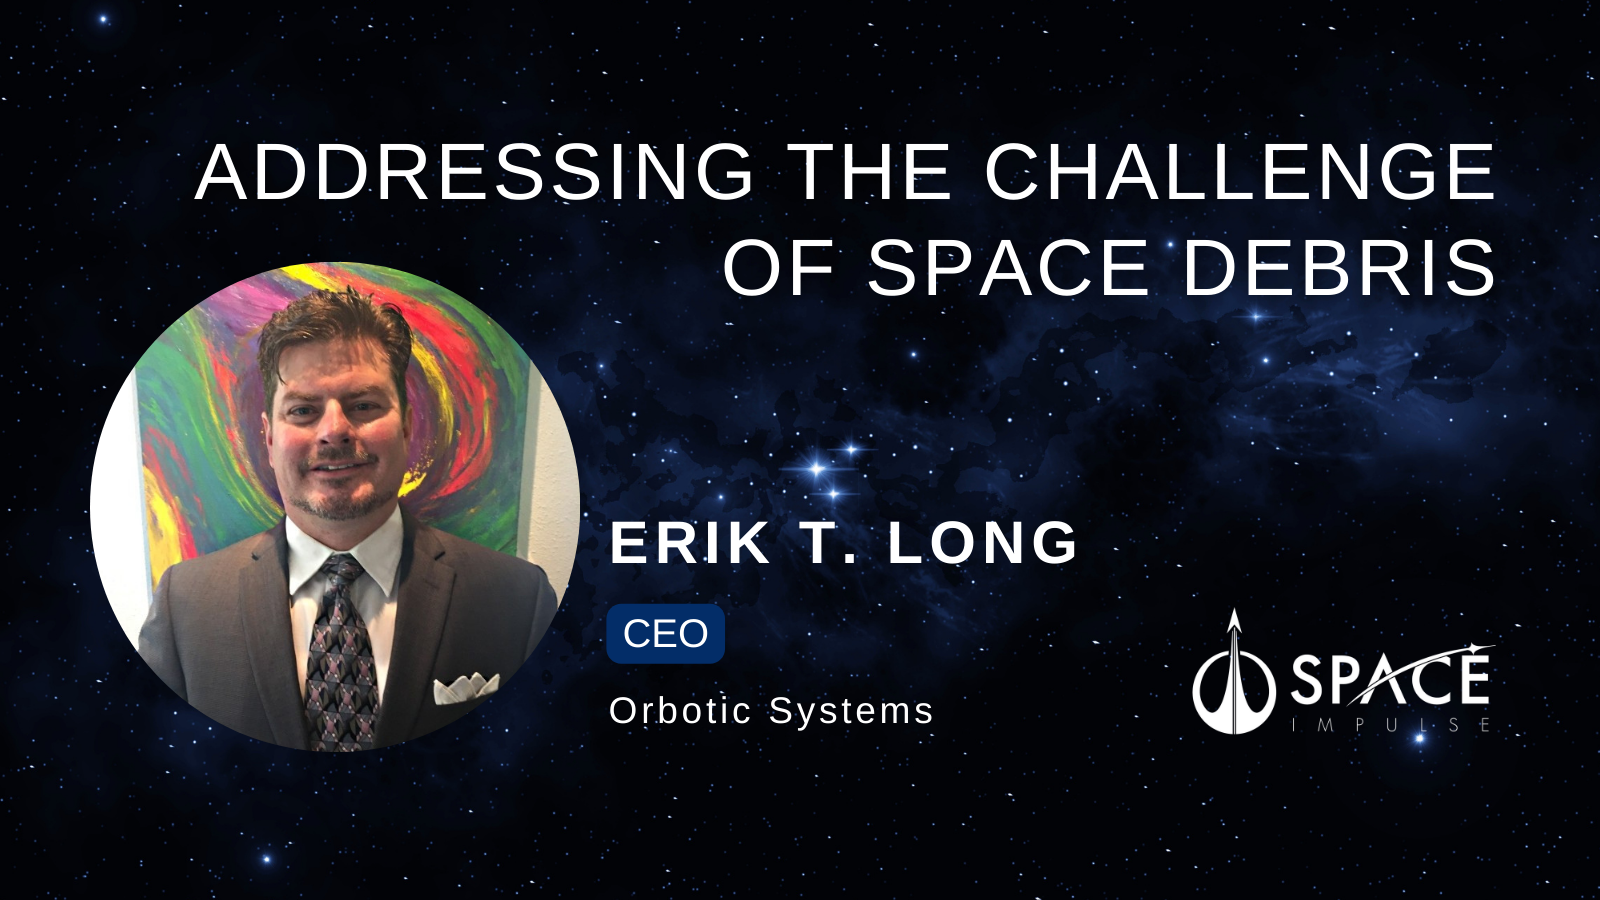 Orbotic Systems - Erik T Long - Addressing the Challenge of Space Debris